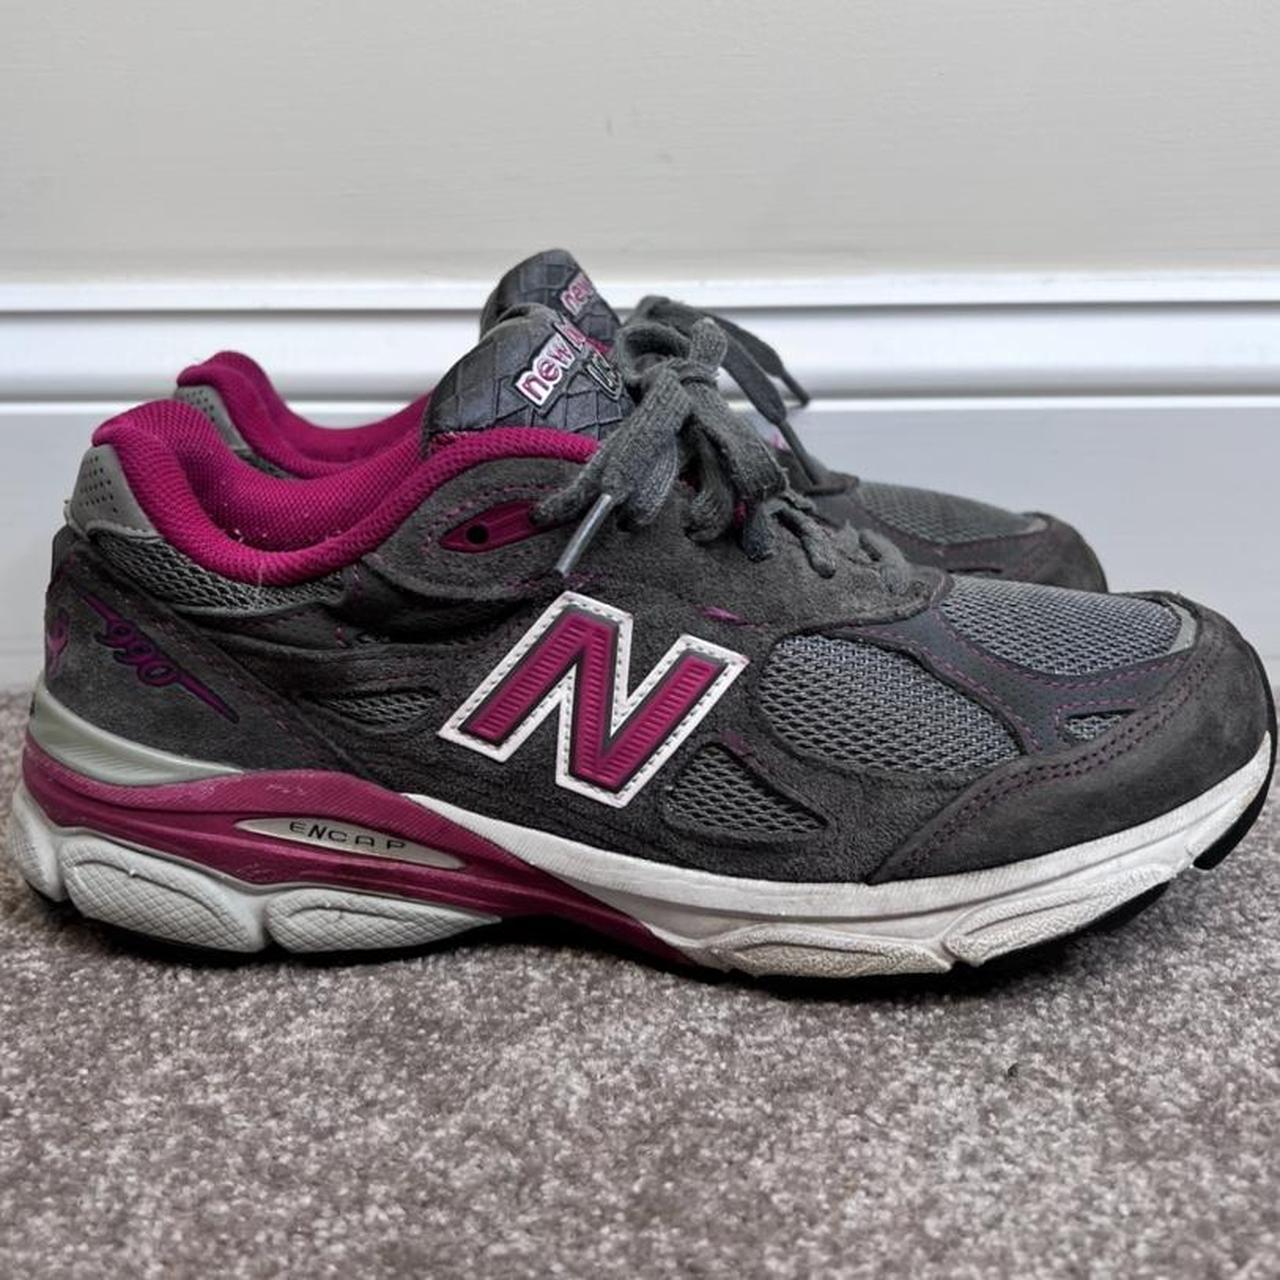 Product Image 3 - New Balance 990 sneakers

Women's size